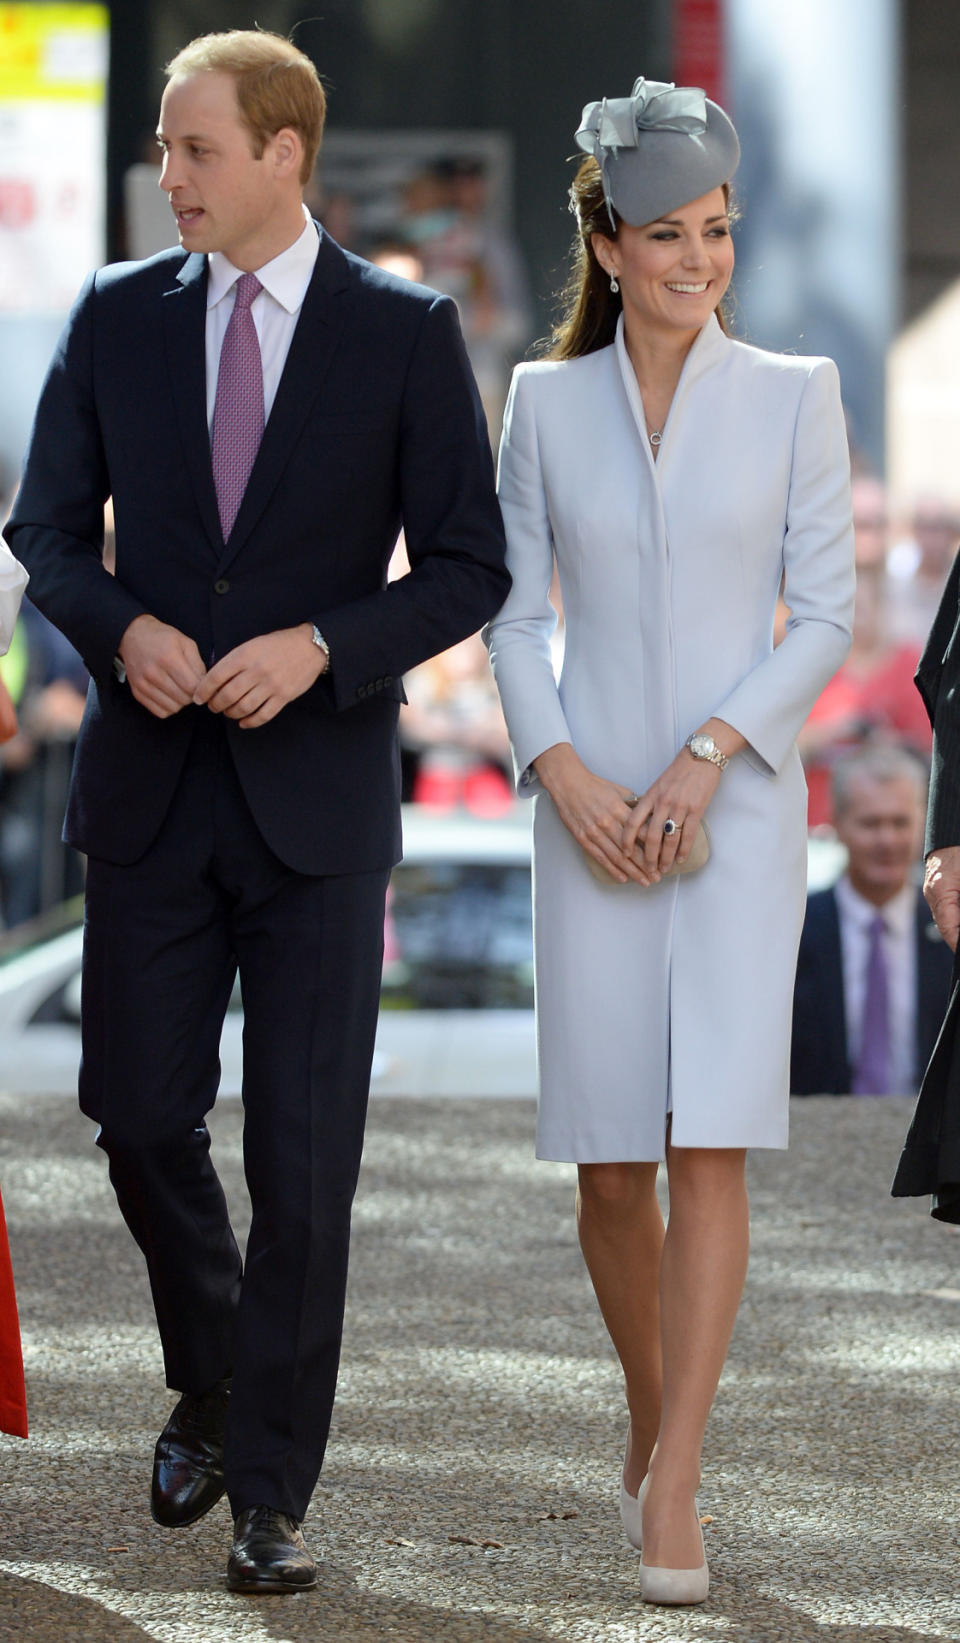 <p>Kate donned an elegant dove grey ensemble by Alexander McQueen for Easter services in Australia. She paired the look with a bespoke hat by Jane Taylor, an Alexander McQueen suede clutch and L.K. Bennett pumps. </p><p><i>[Photo: PA]</i></p>